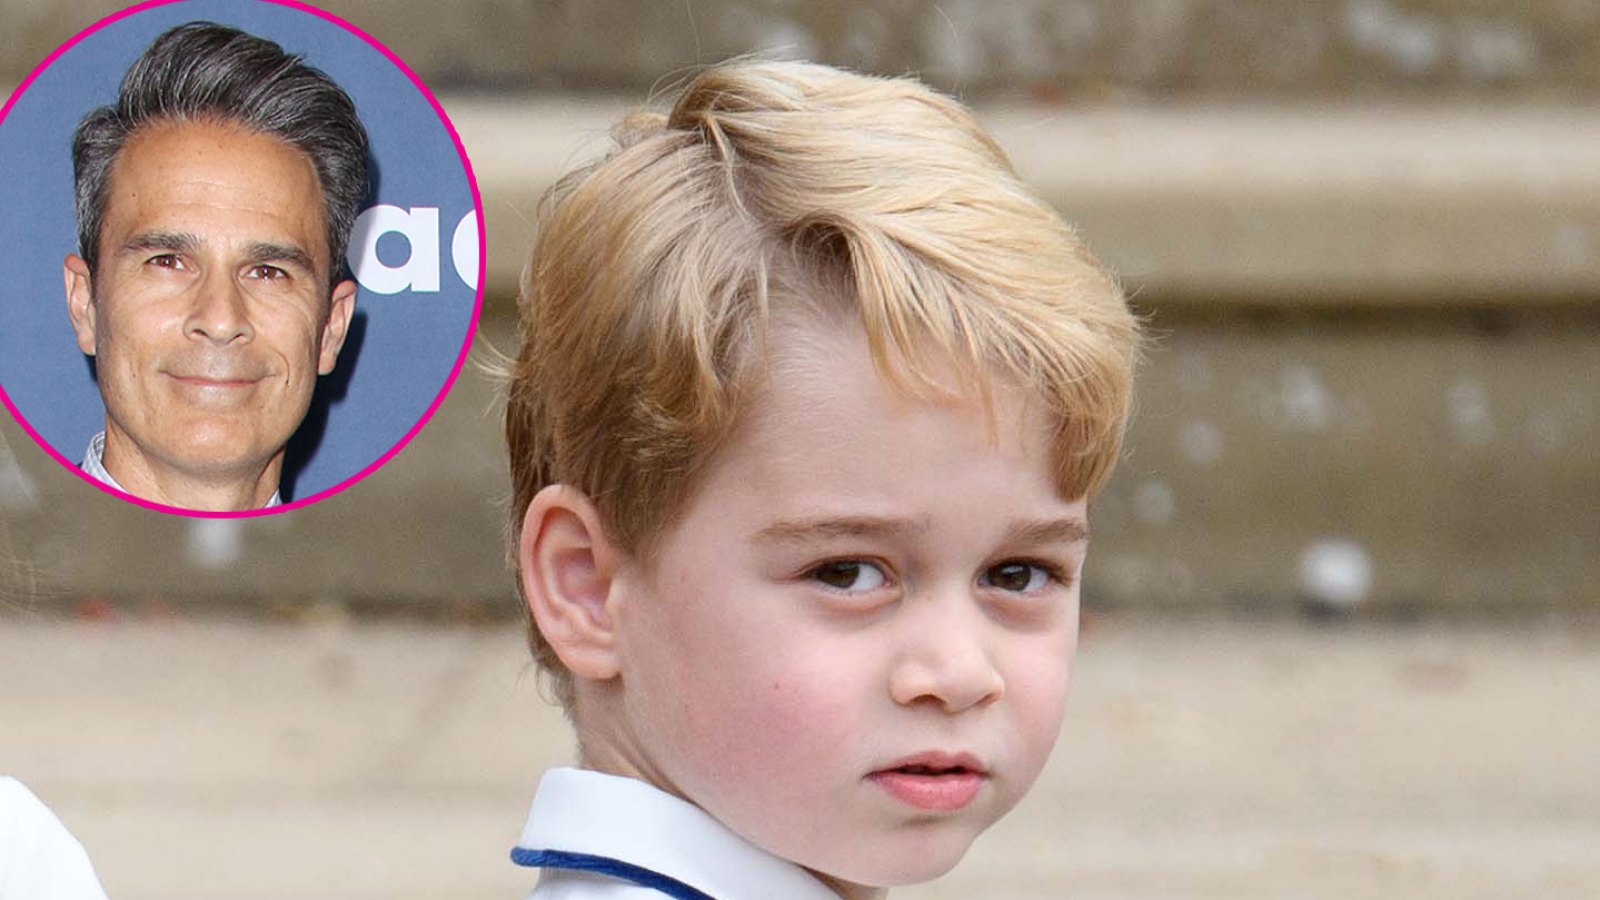 Gary Janetti to Voice Prince George in Animated Series